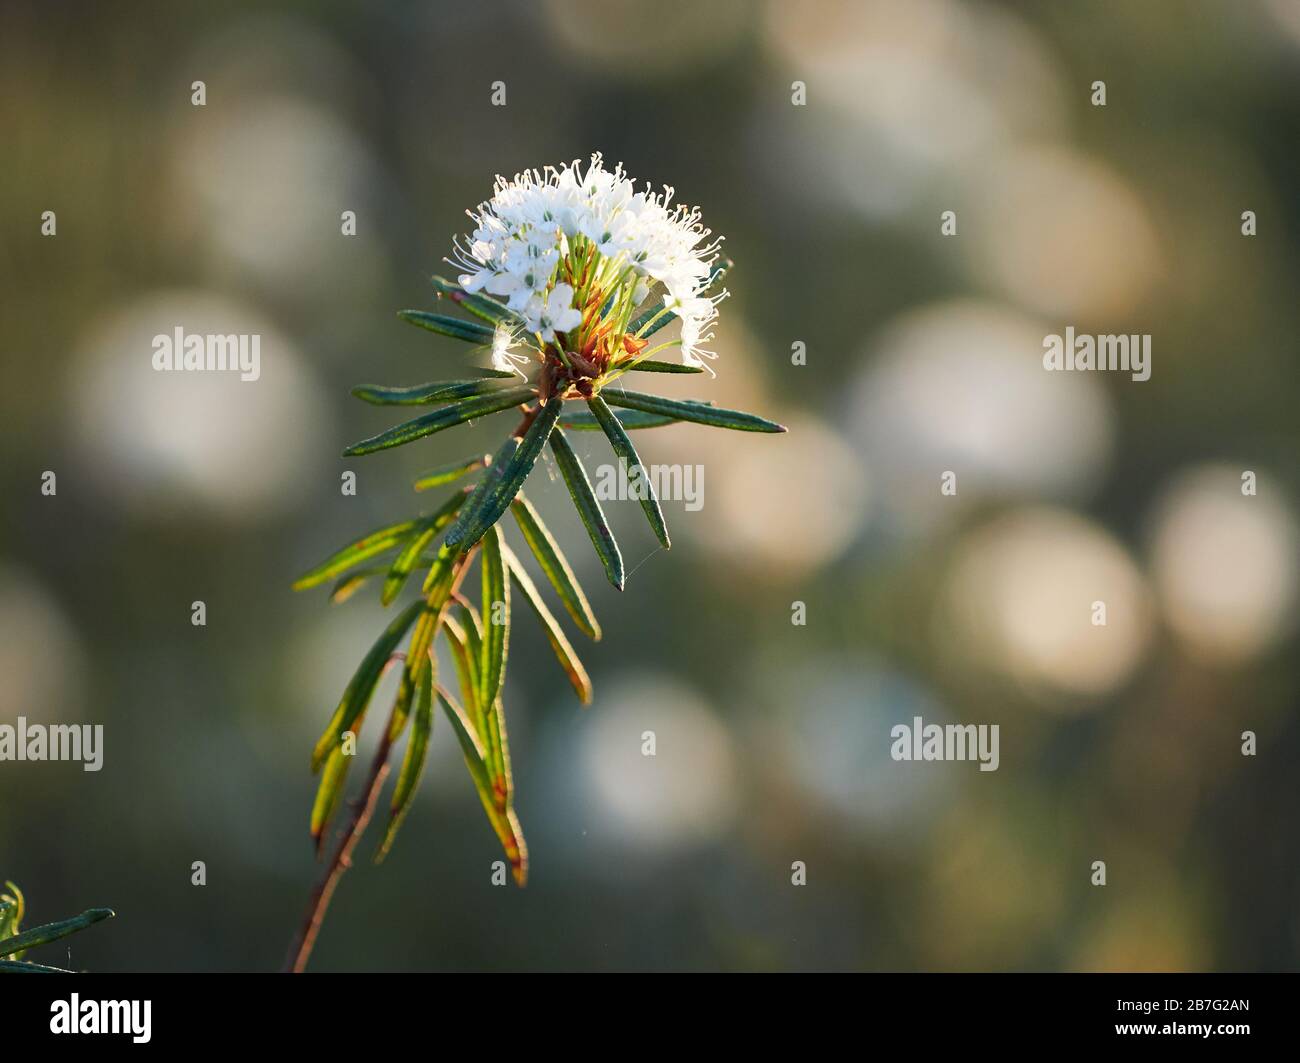 Closeup of marsh labrador tea, Rhododendron tomentosum plant in  the autumn sunlight. Selective focus, blurred background. Stock Photo